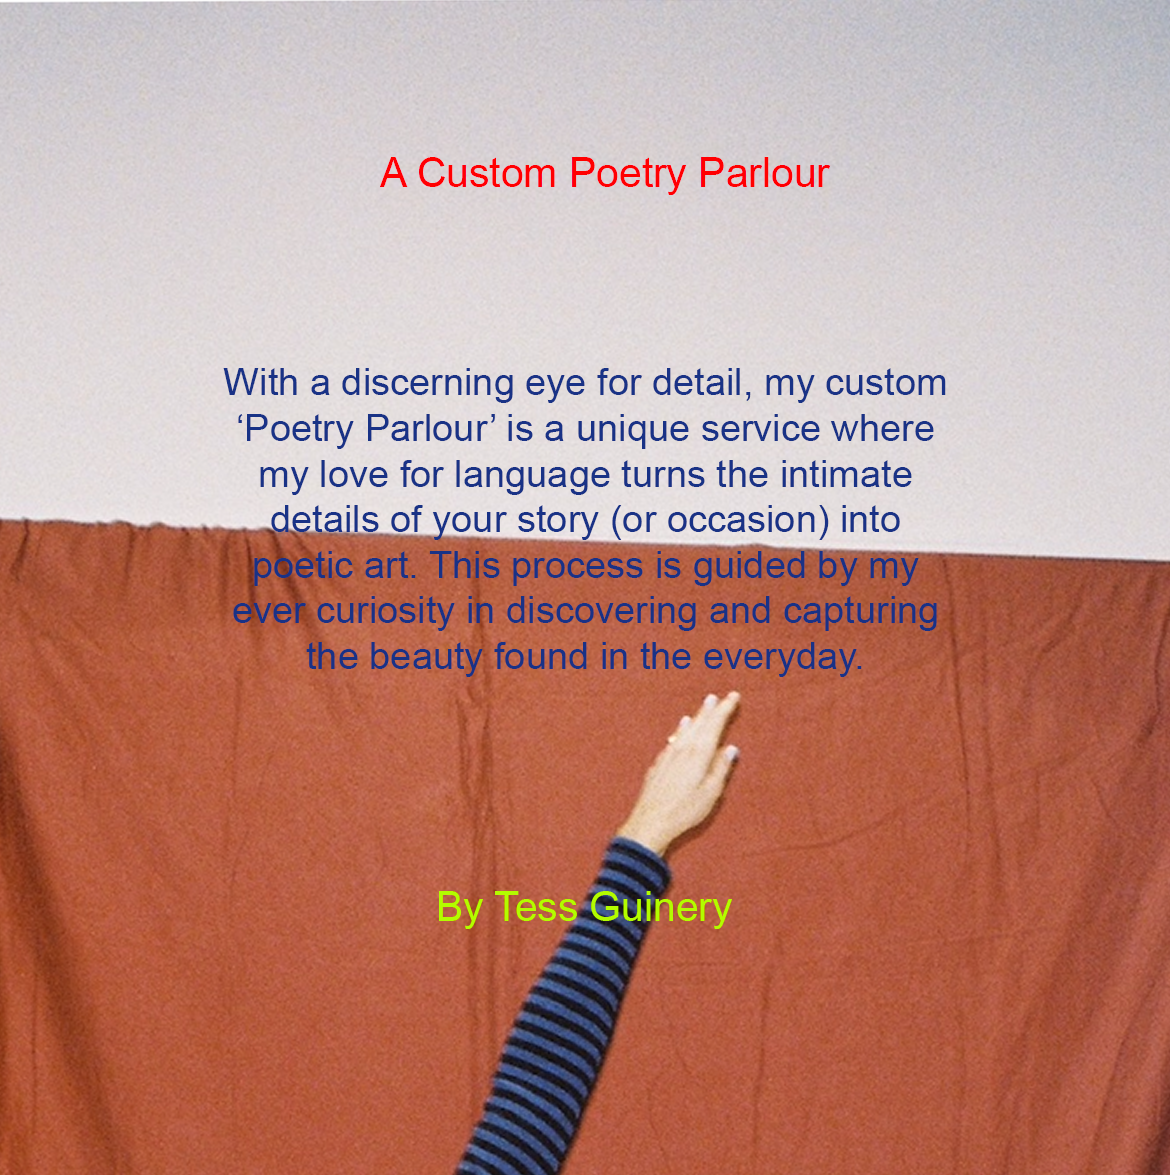 Tess Guinery's Poetry Parlour.